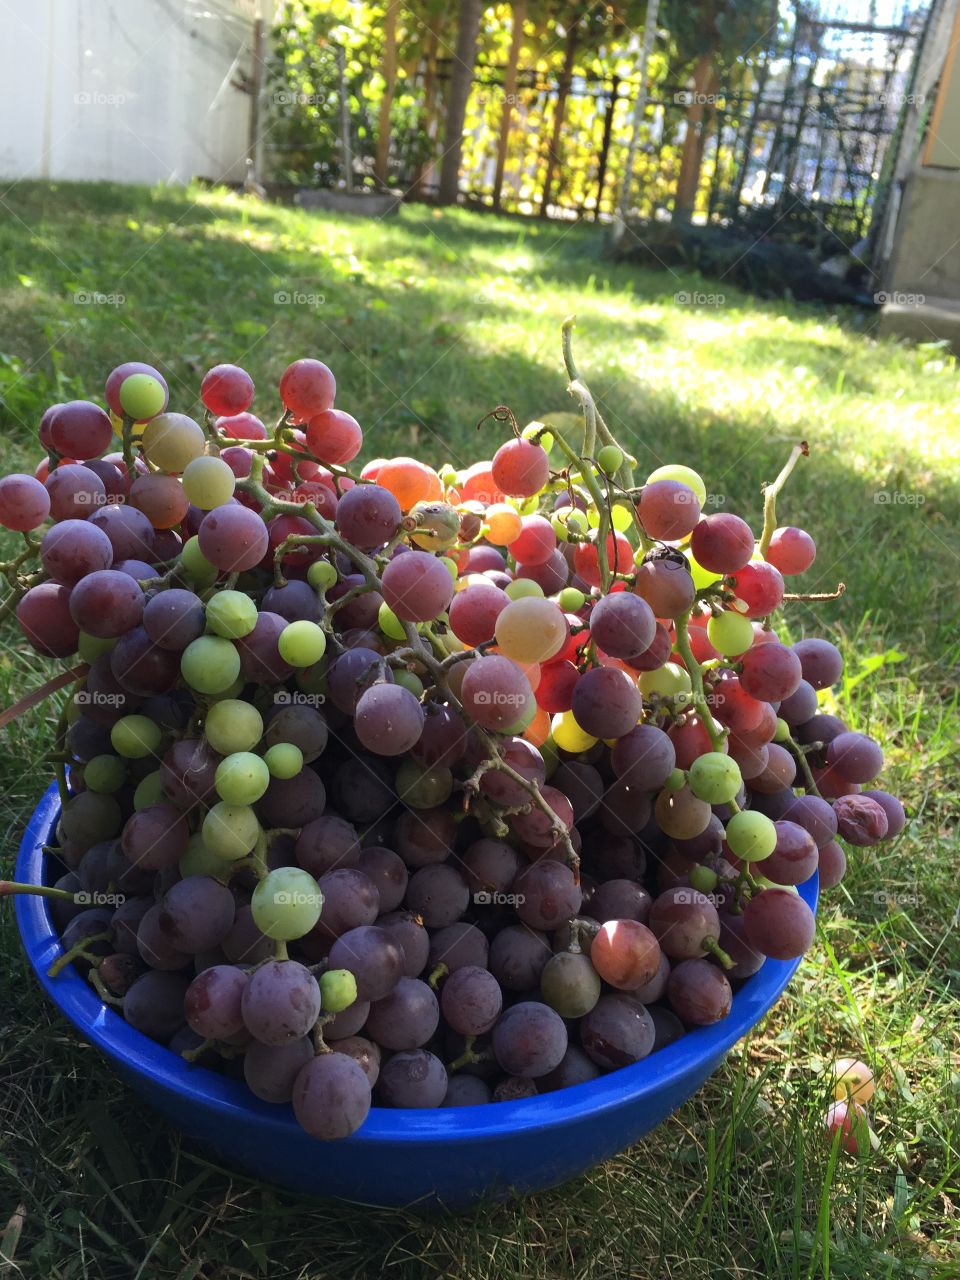 Grapes and sunshine. There's something magical about the New England fall. And my grapes tell the story of that magic.
